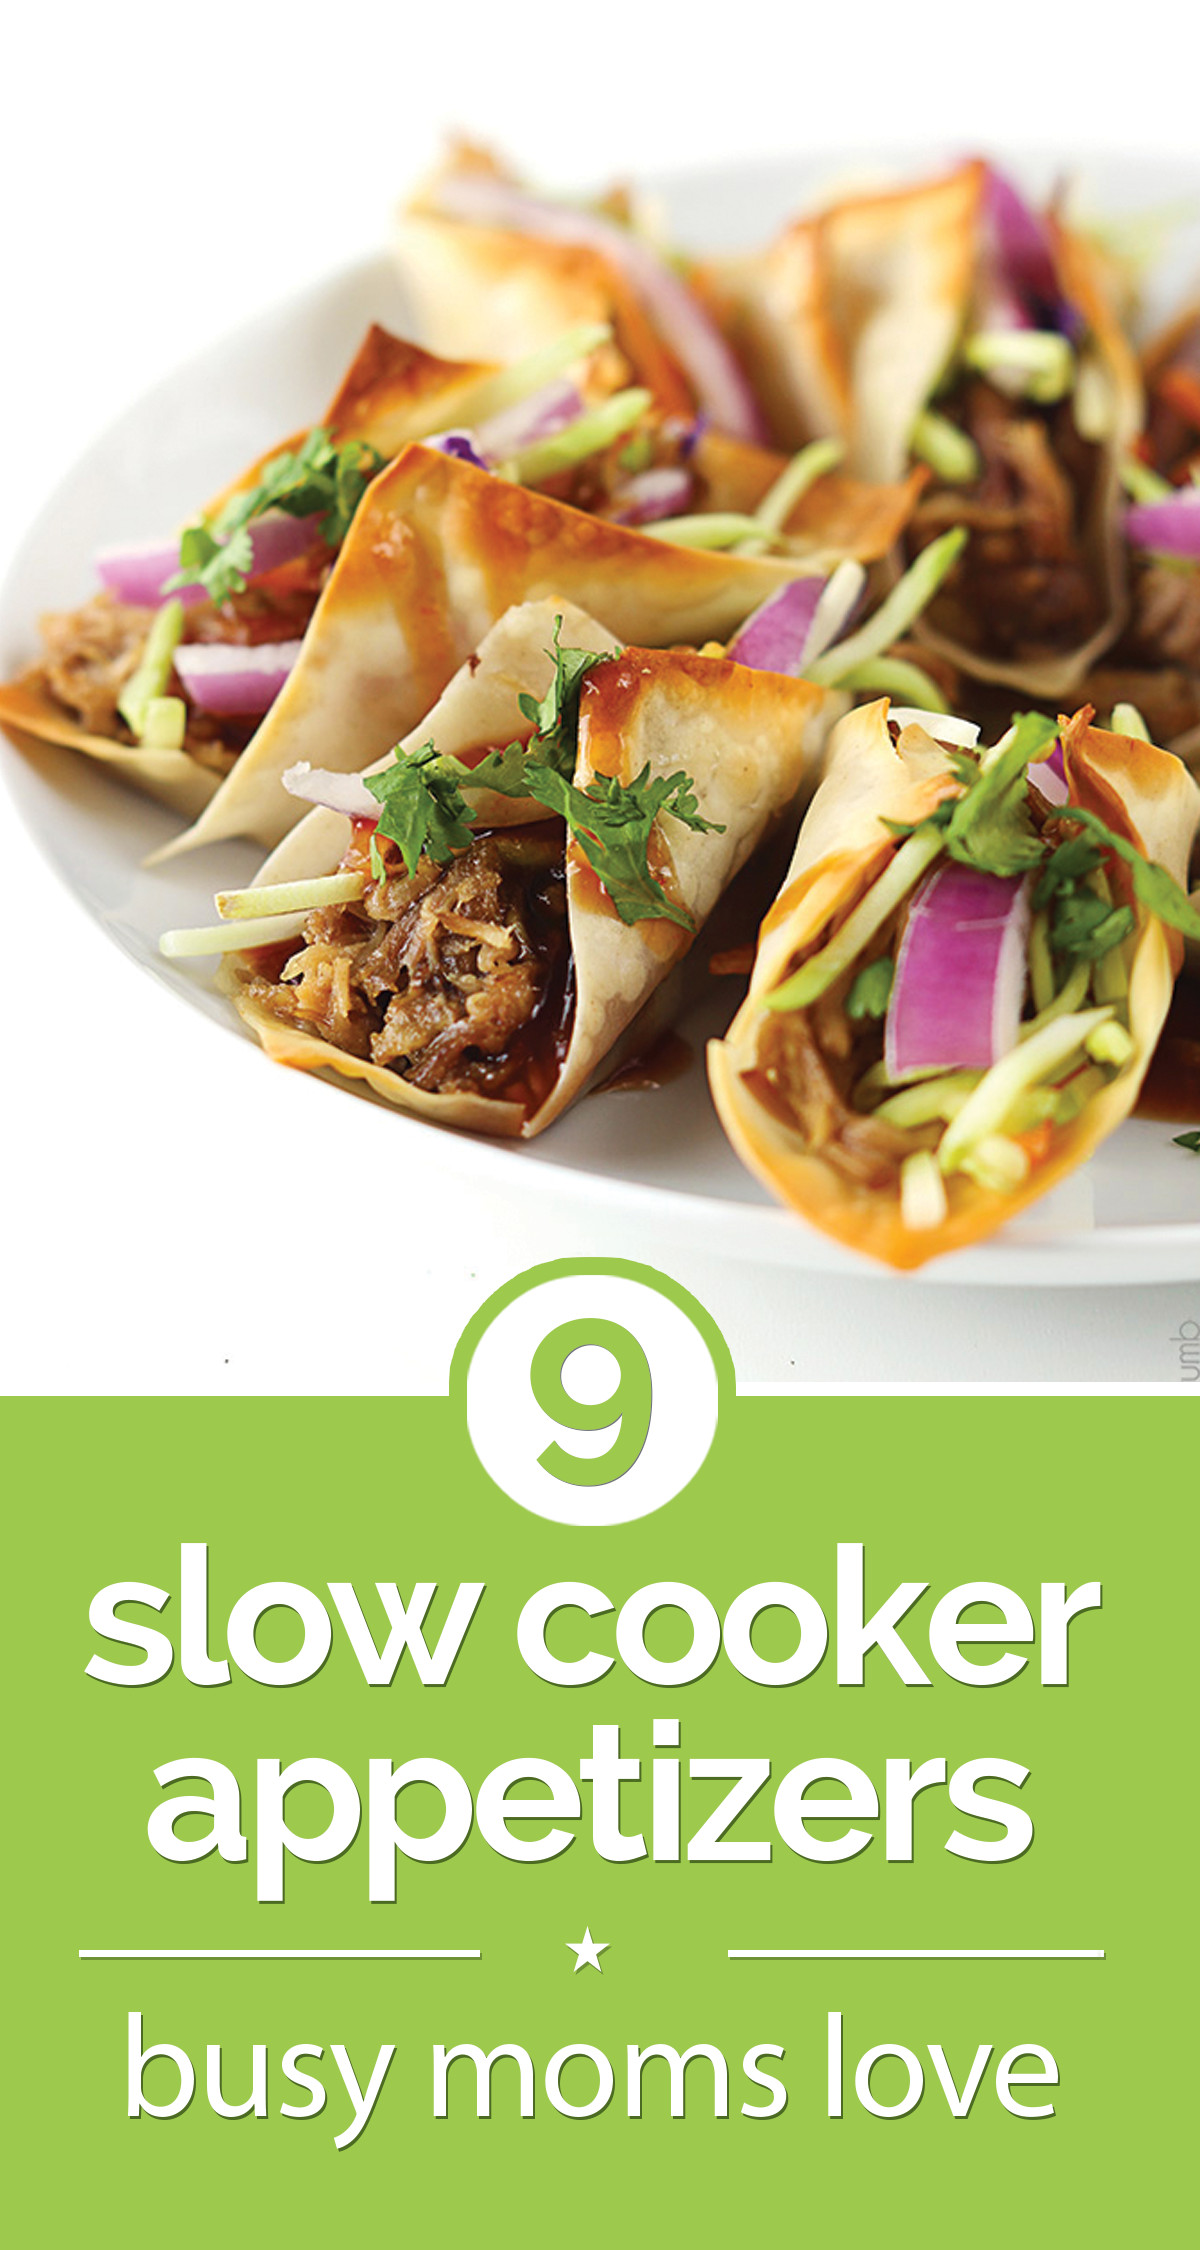 Slow Cooker Appetizers For Party
 9 Slow Cooker Appetizers Busy Moms Love